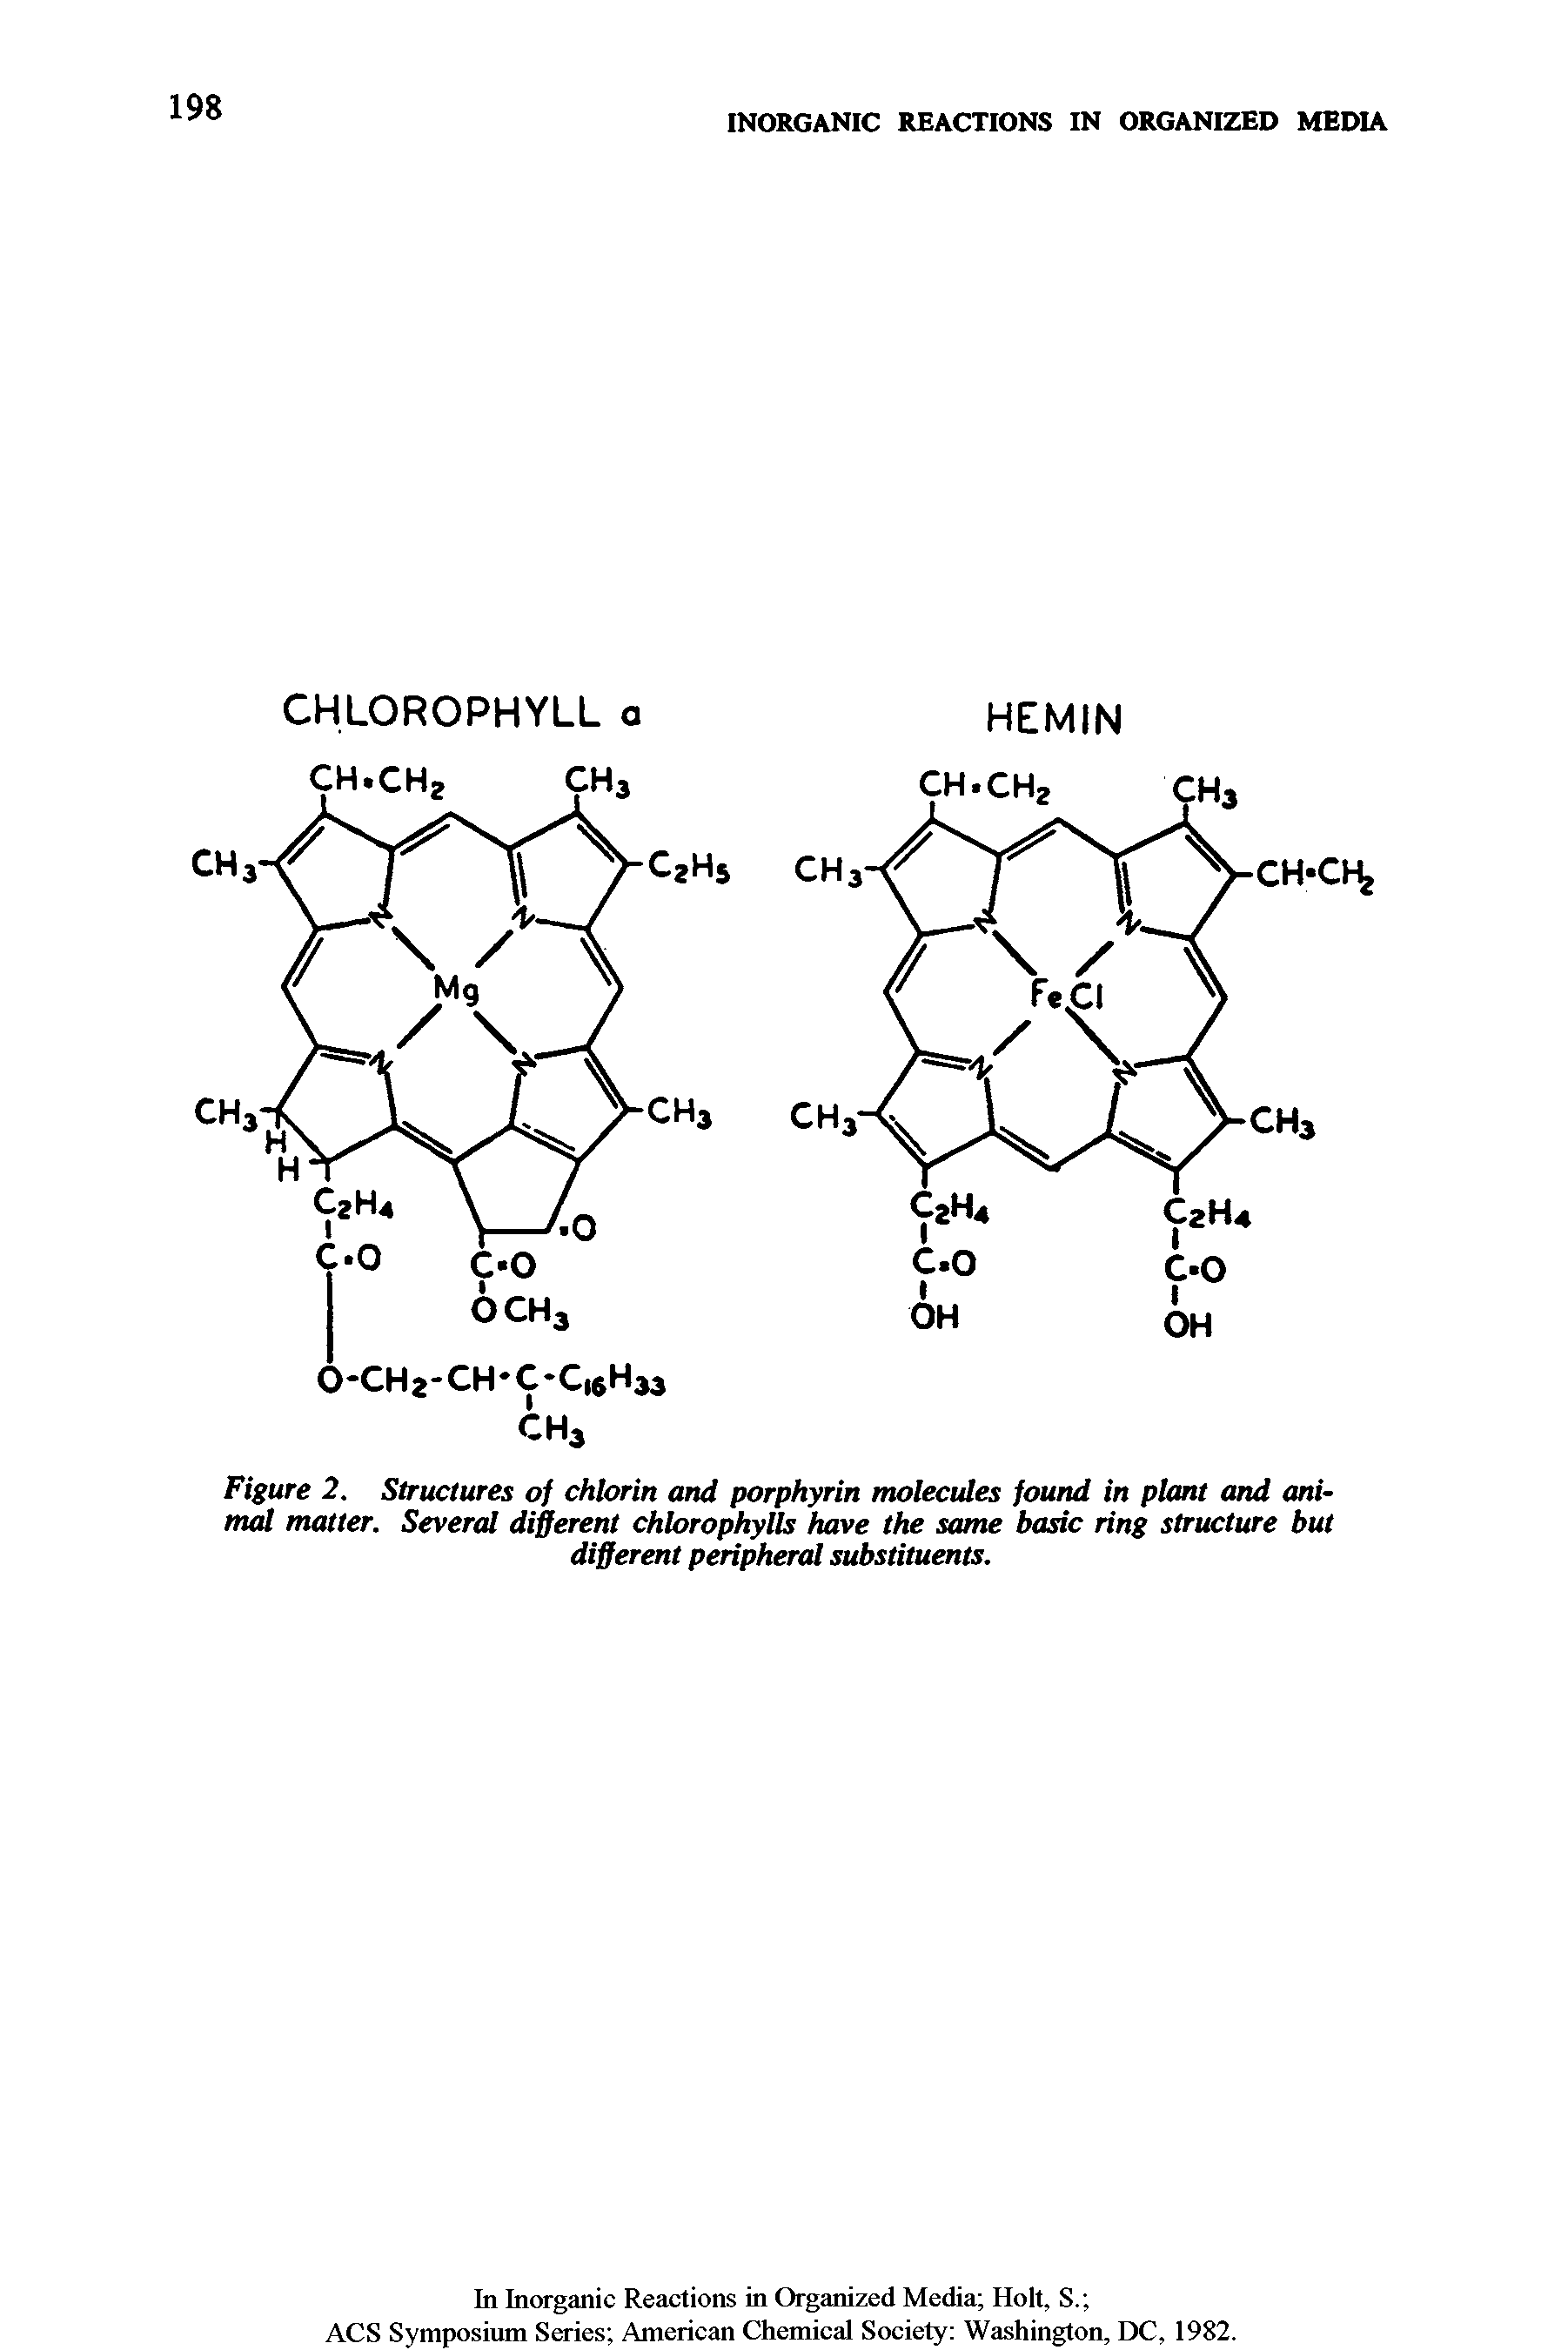 Figure 2. Structures of chlorin and porphyrin molecules found in plant and animal matter. Several different chlorophylls have the same basic ring structure but different peripheral substituents.